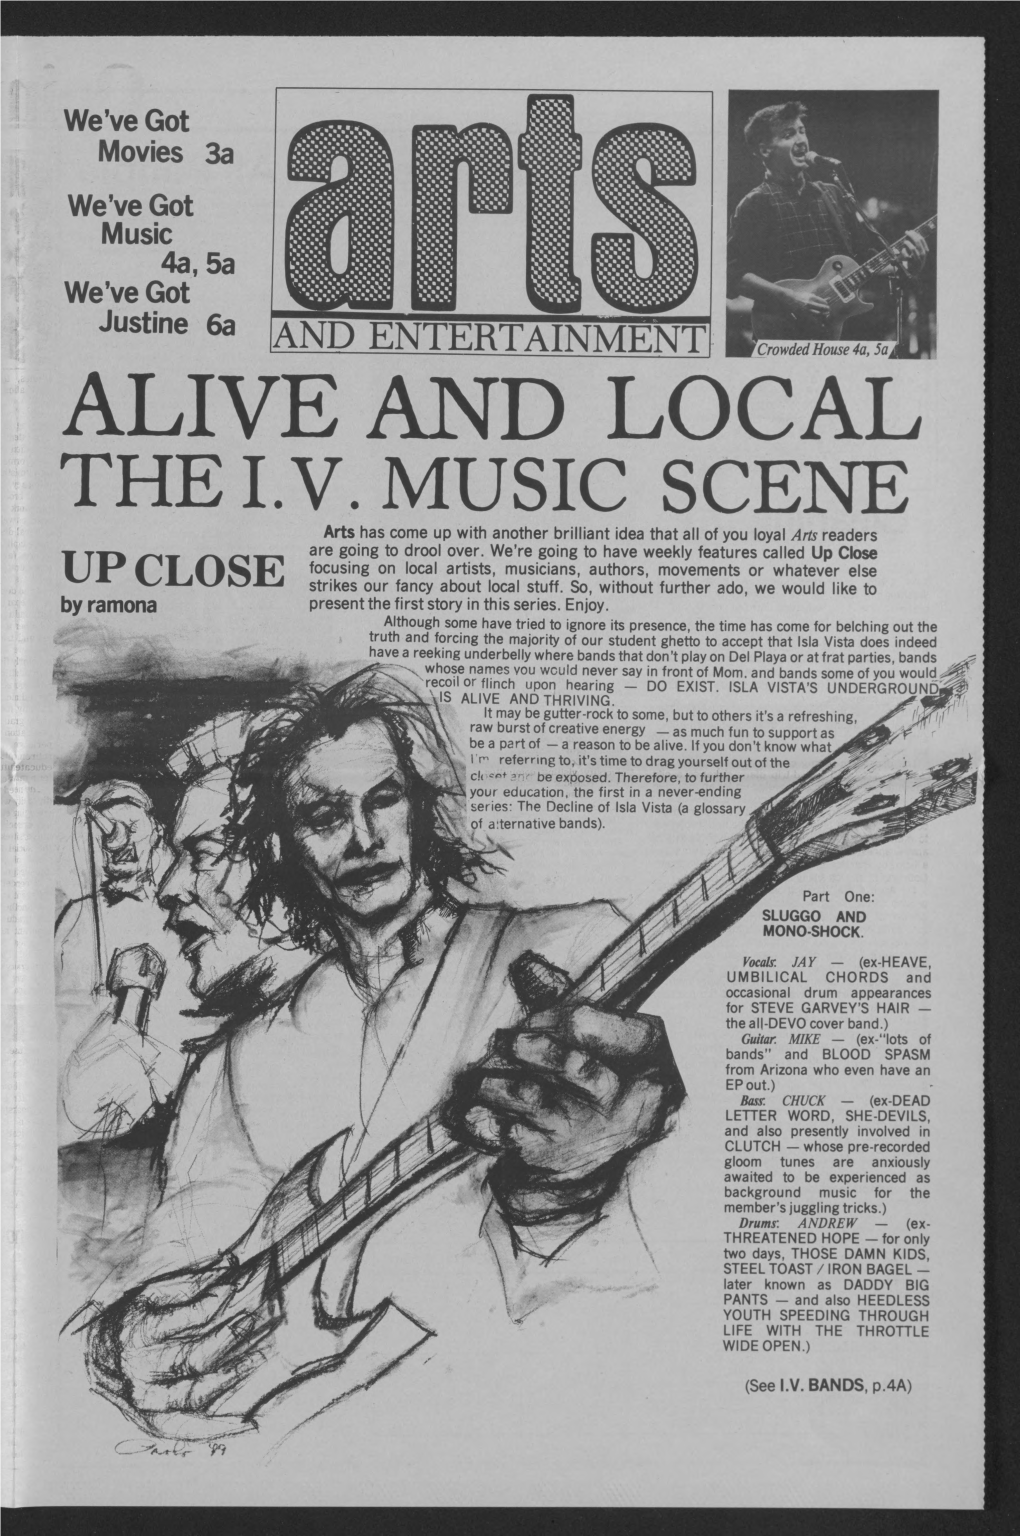 THE I.V. MUSIC SCENE Arts Has Come up with Another Brilliant Idea That All of You Loyal Arts Readers Are Going to Drool Over